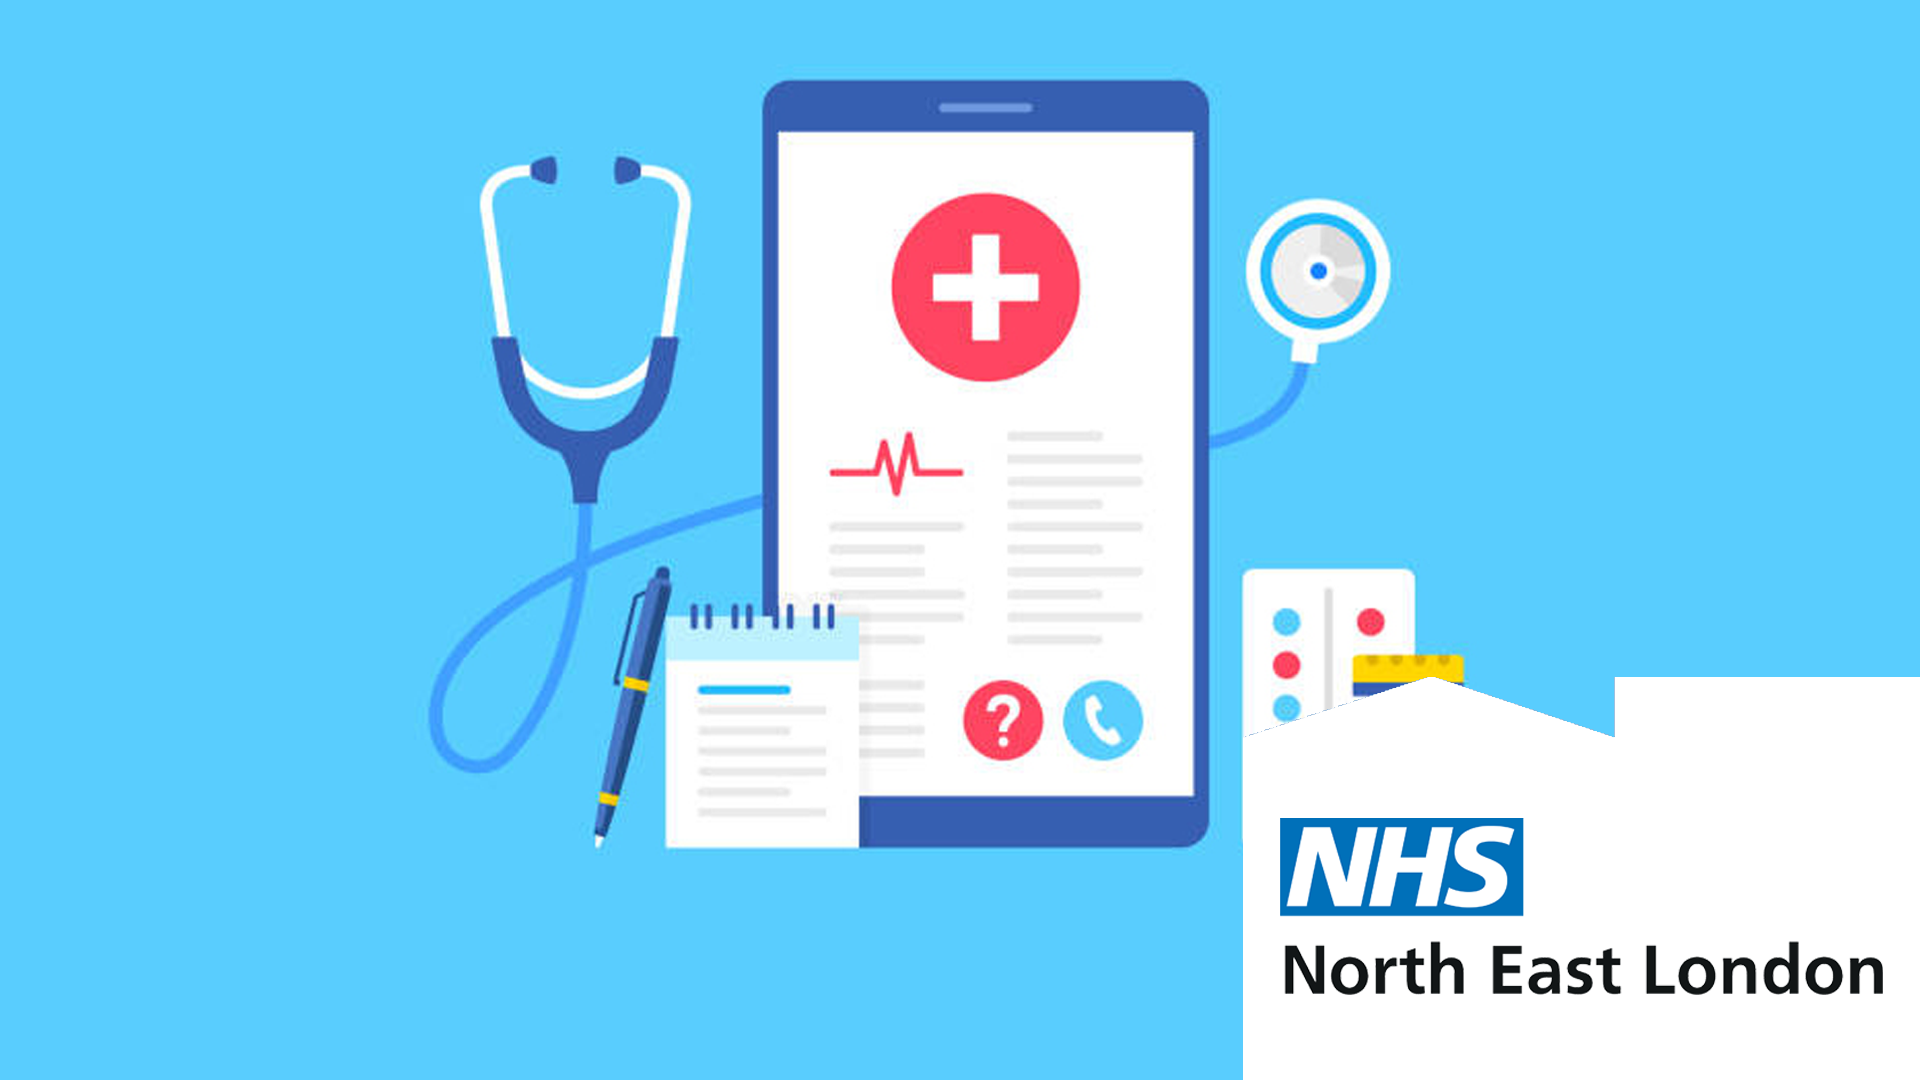 NHS North East London case study